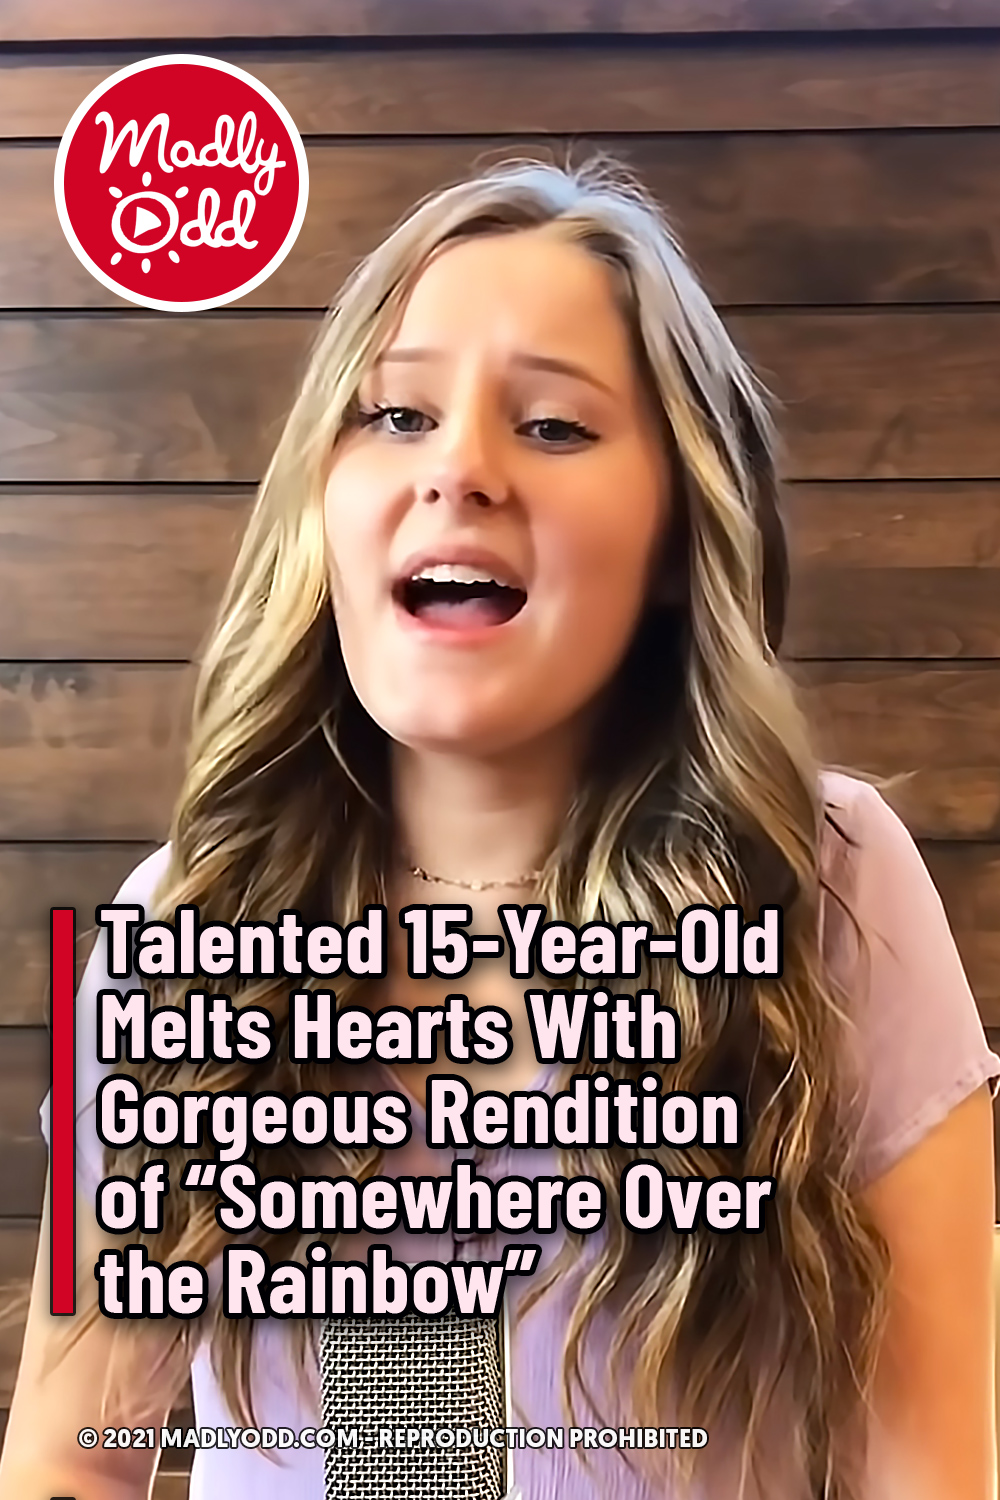 Talented 15-Year-Old Melts Hearts With Gorgeous Rendition of “Somewhere Over the Rainbow”